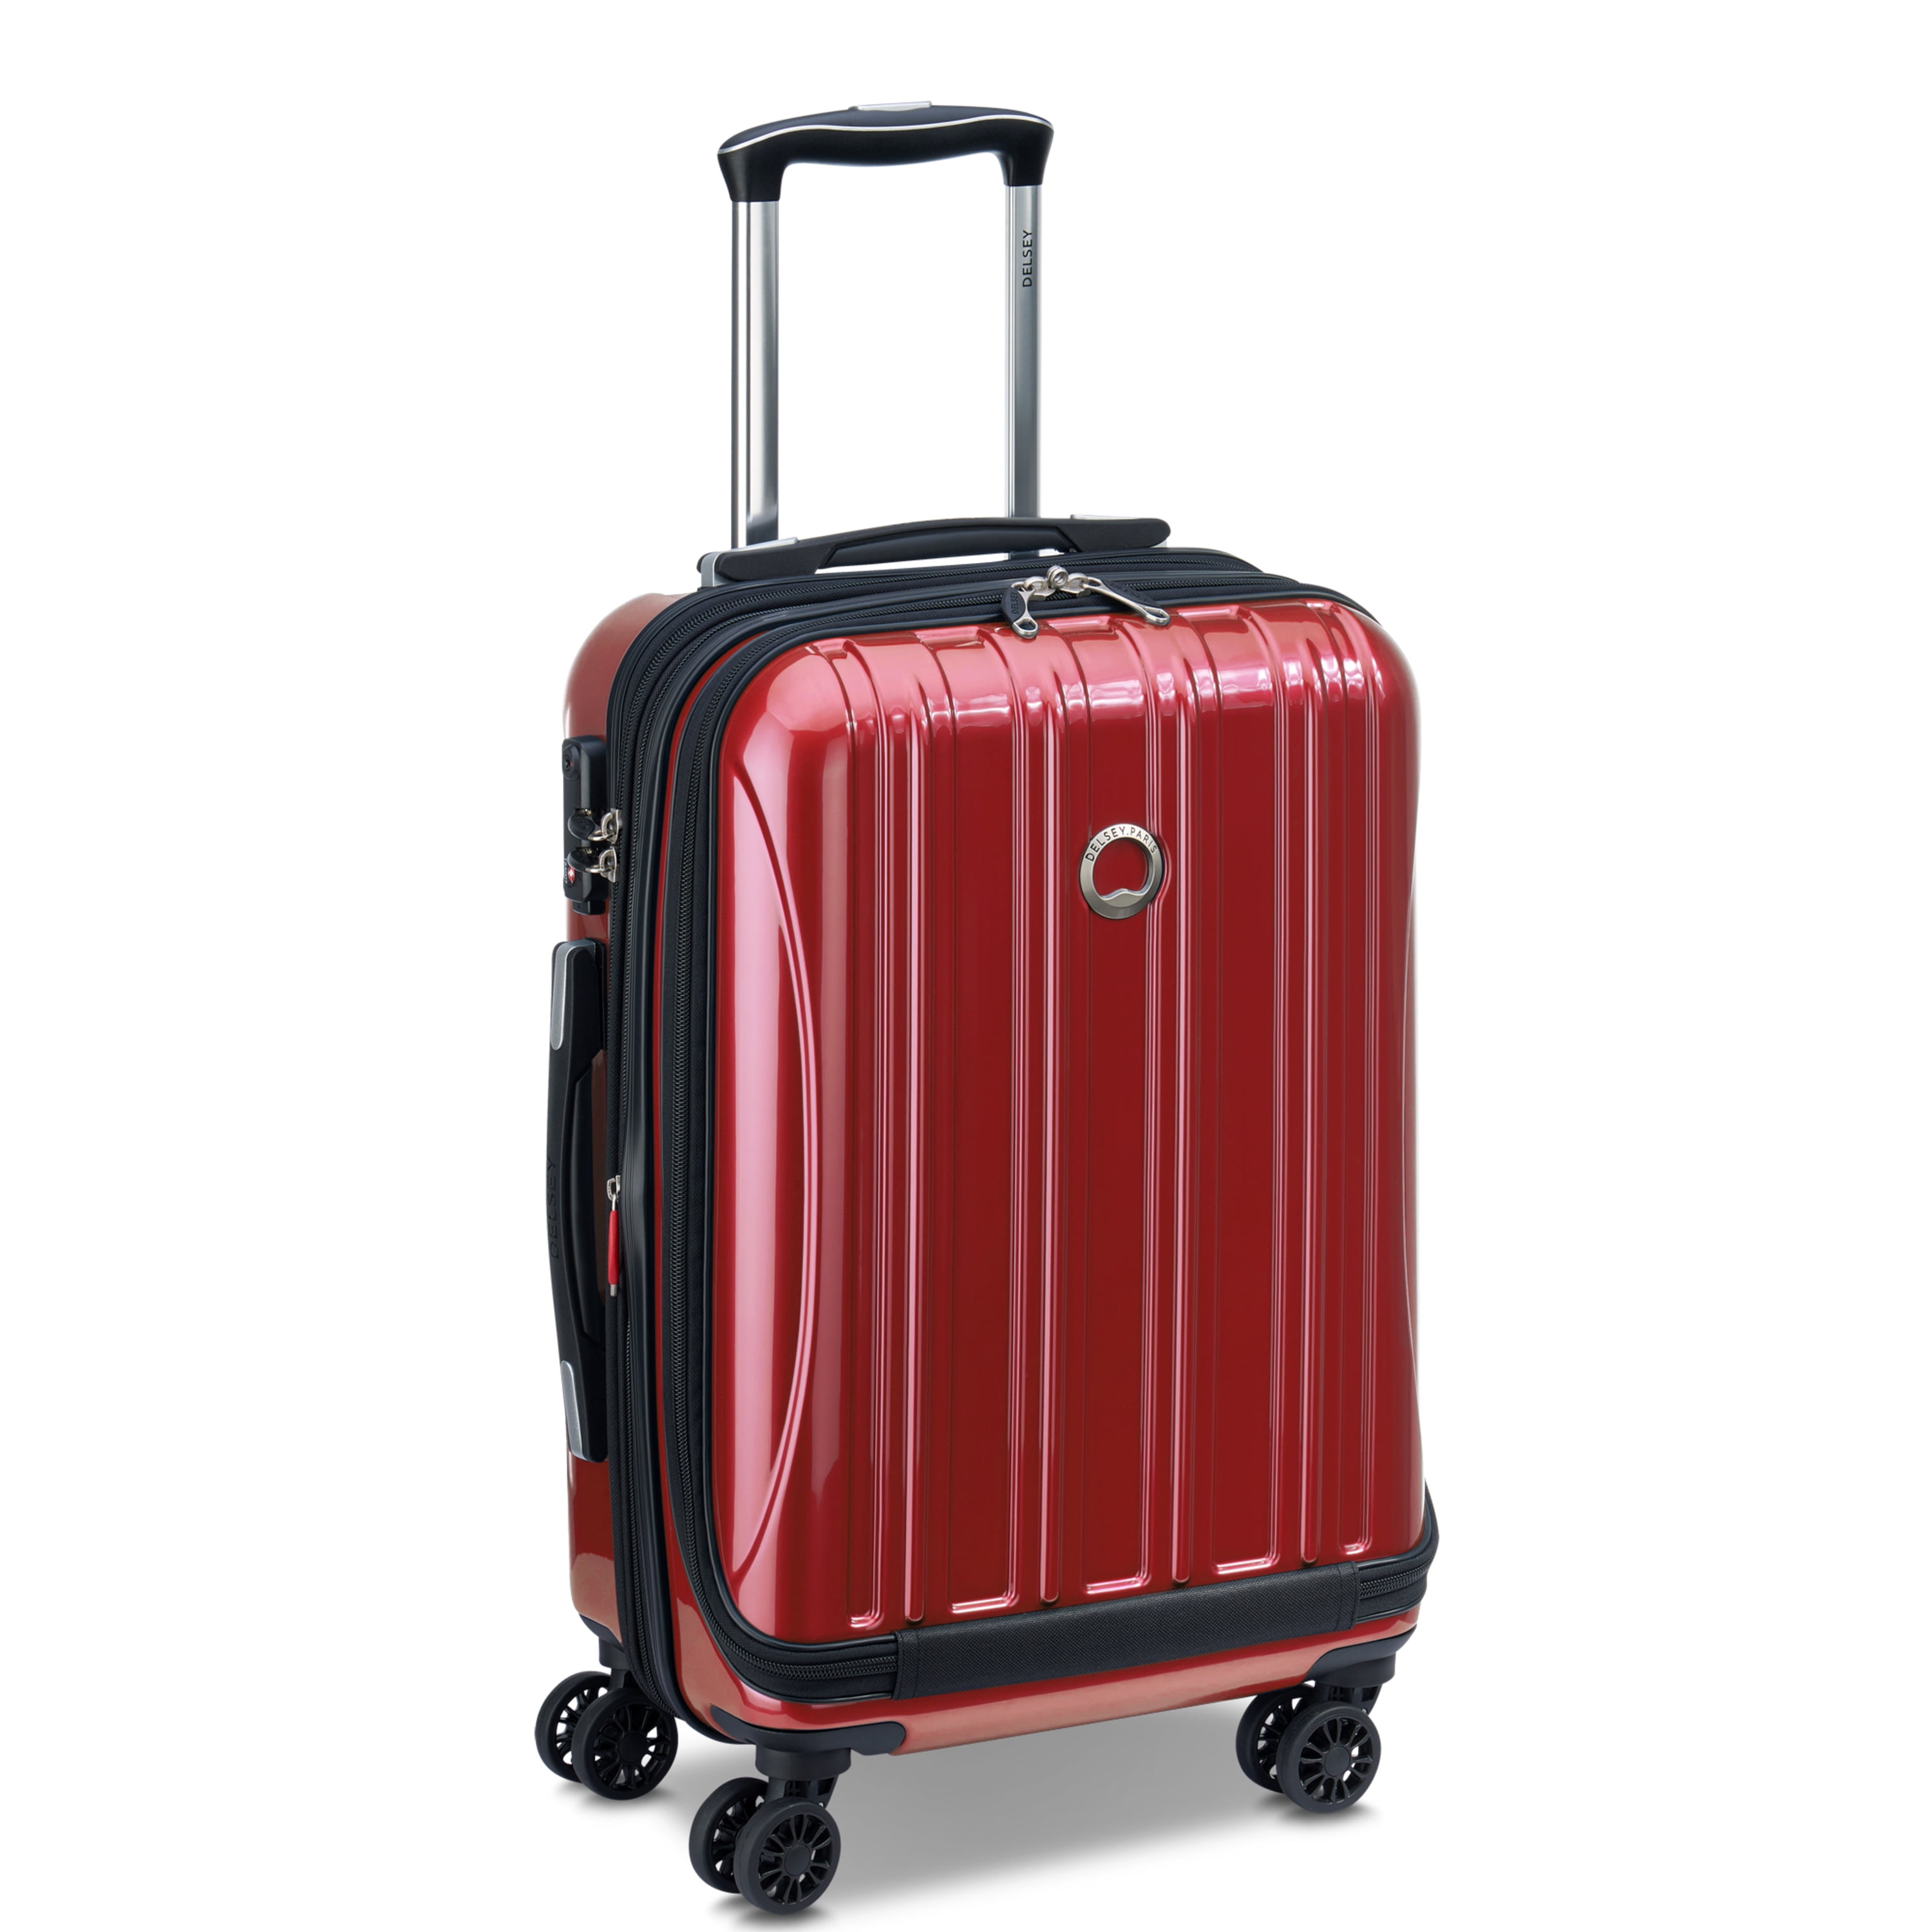 Amazon.com | DELSEY Paris Jessica Hardside Expandable Luggage with Spinner  Wheels (Rose Gold, 3-Piece Set (21/25/29)) | Carry-Ons